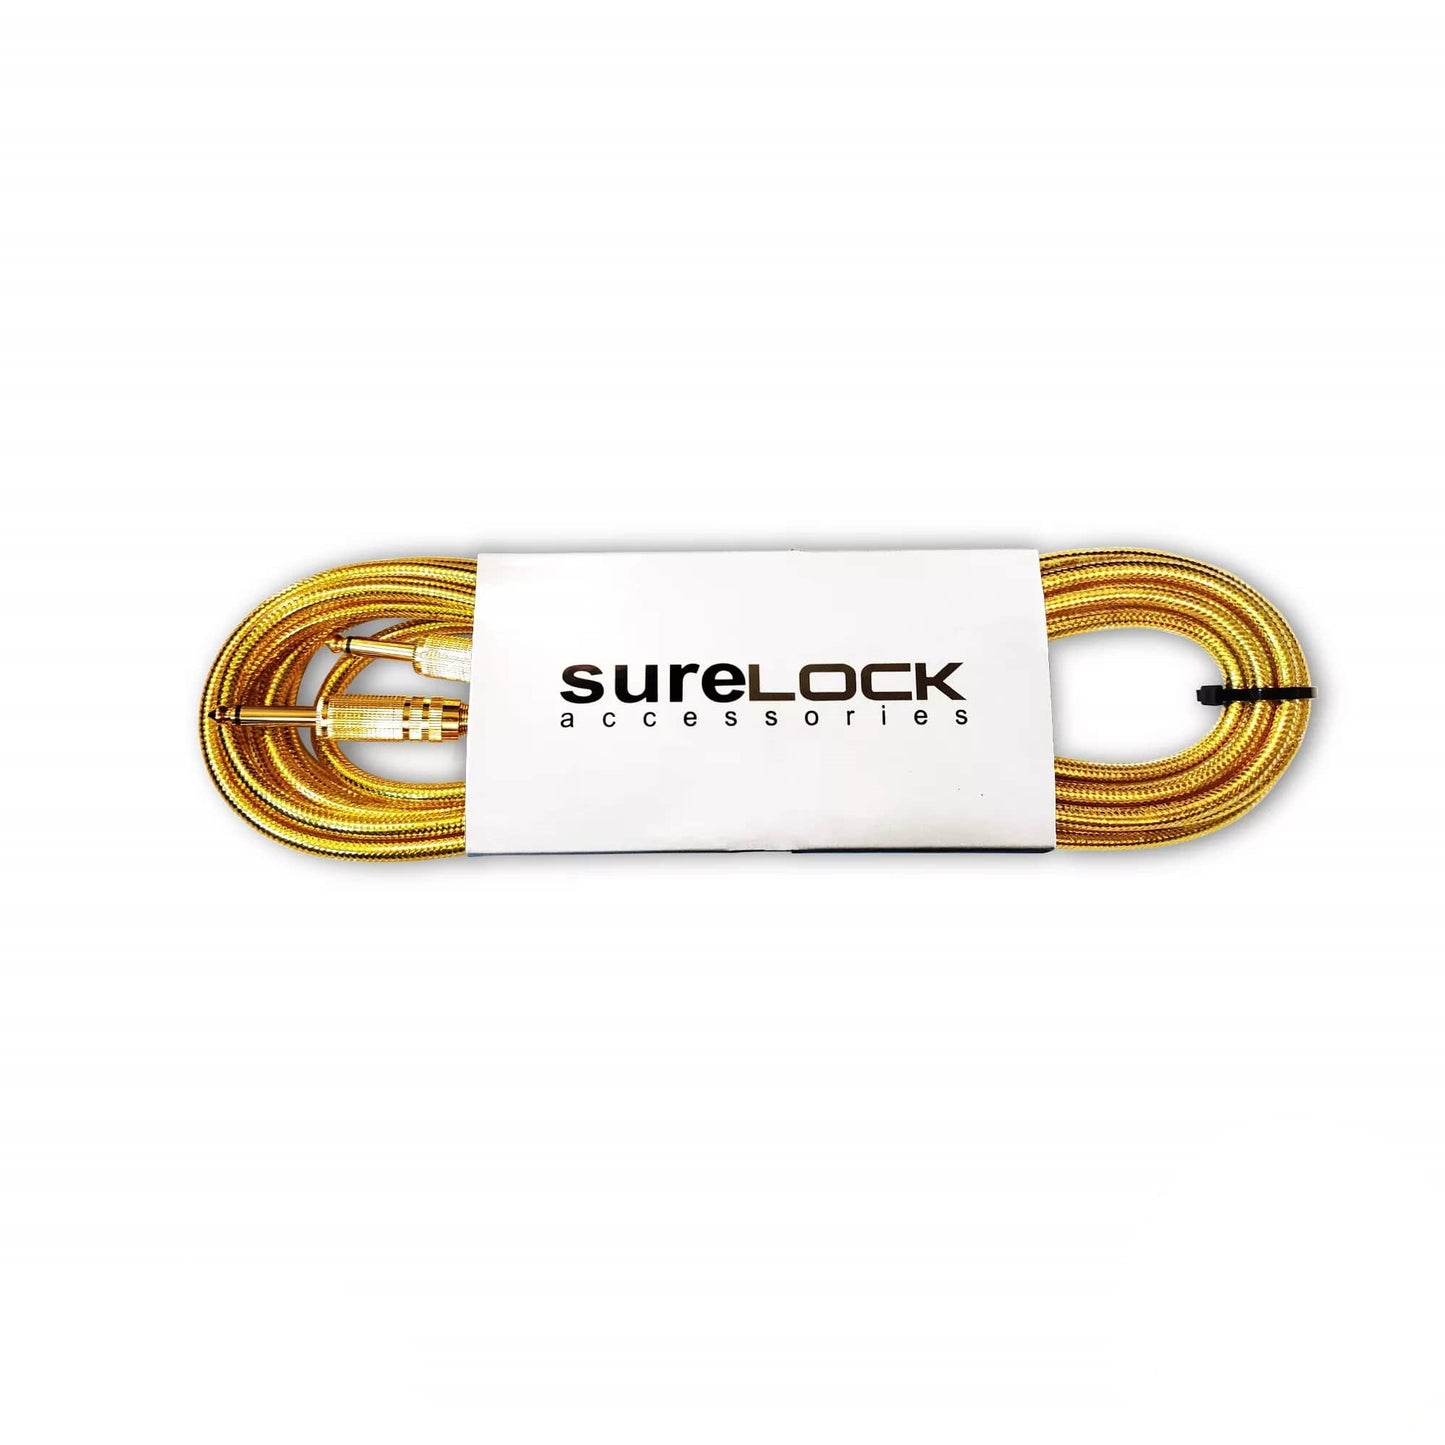 Surelock 20ft Nylon Braided Instrument Cable with 1/4-inch Male to Male Plugs for Guitars and Keyboards (Gold)